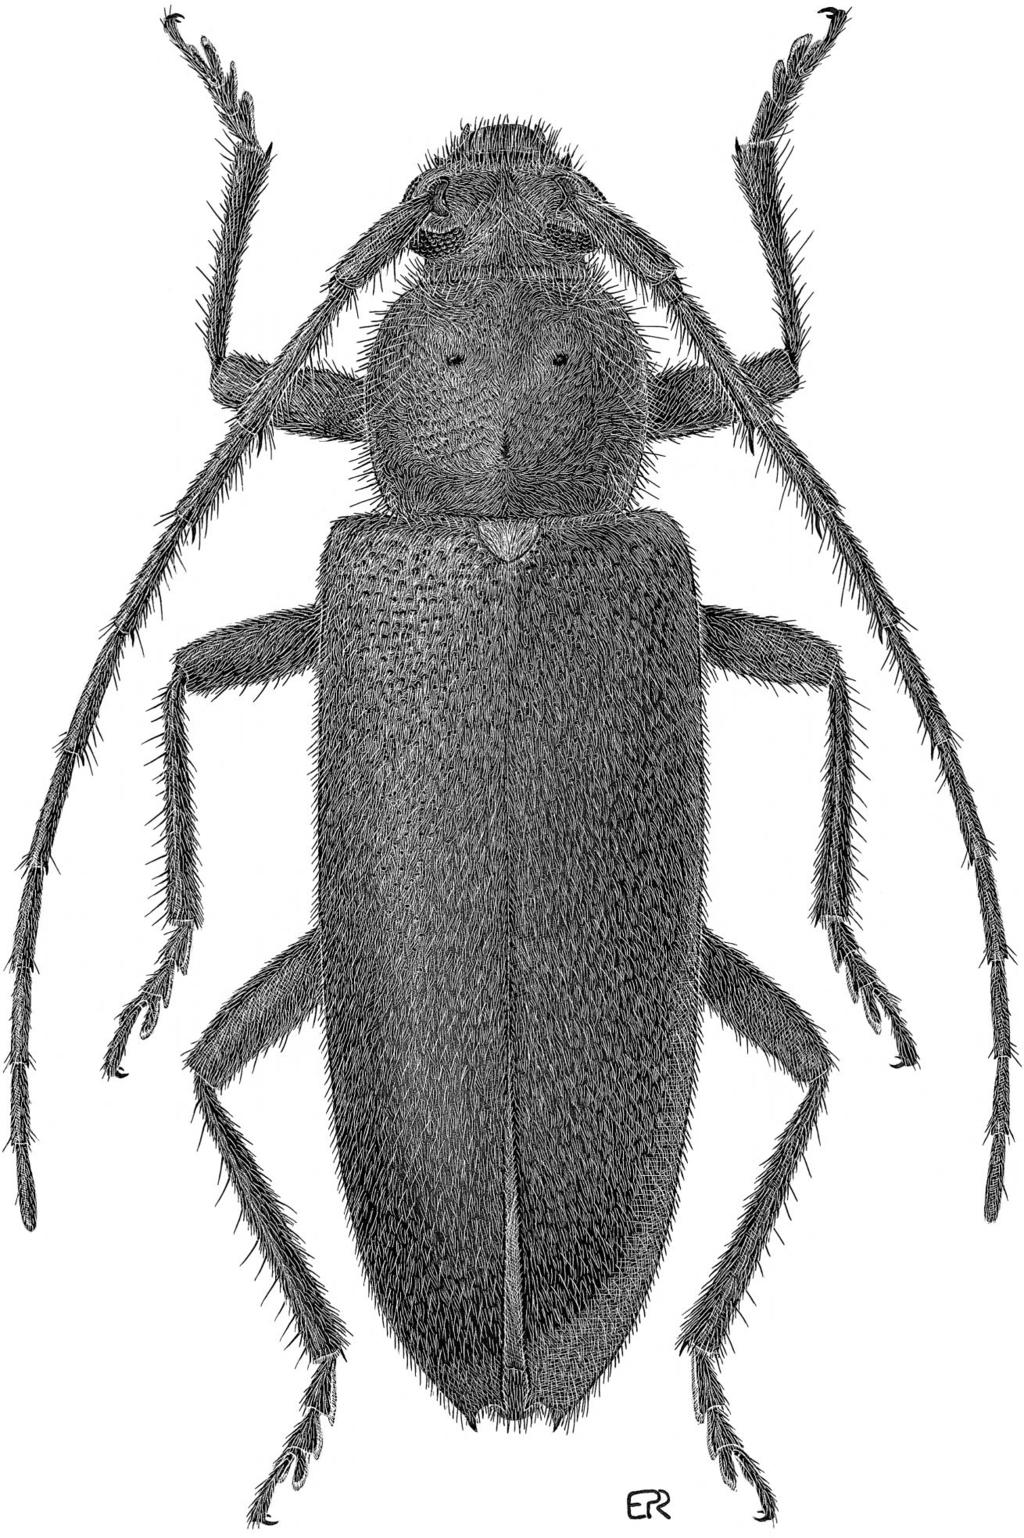 572 THE COLEOPTERISTS BULLETIN 56(4), 2002 Fig. 1. view.